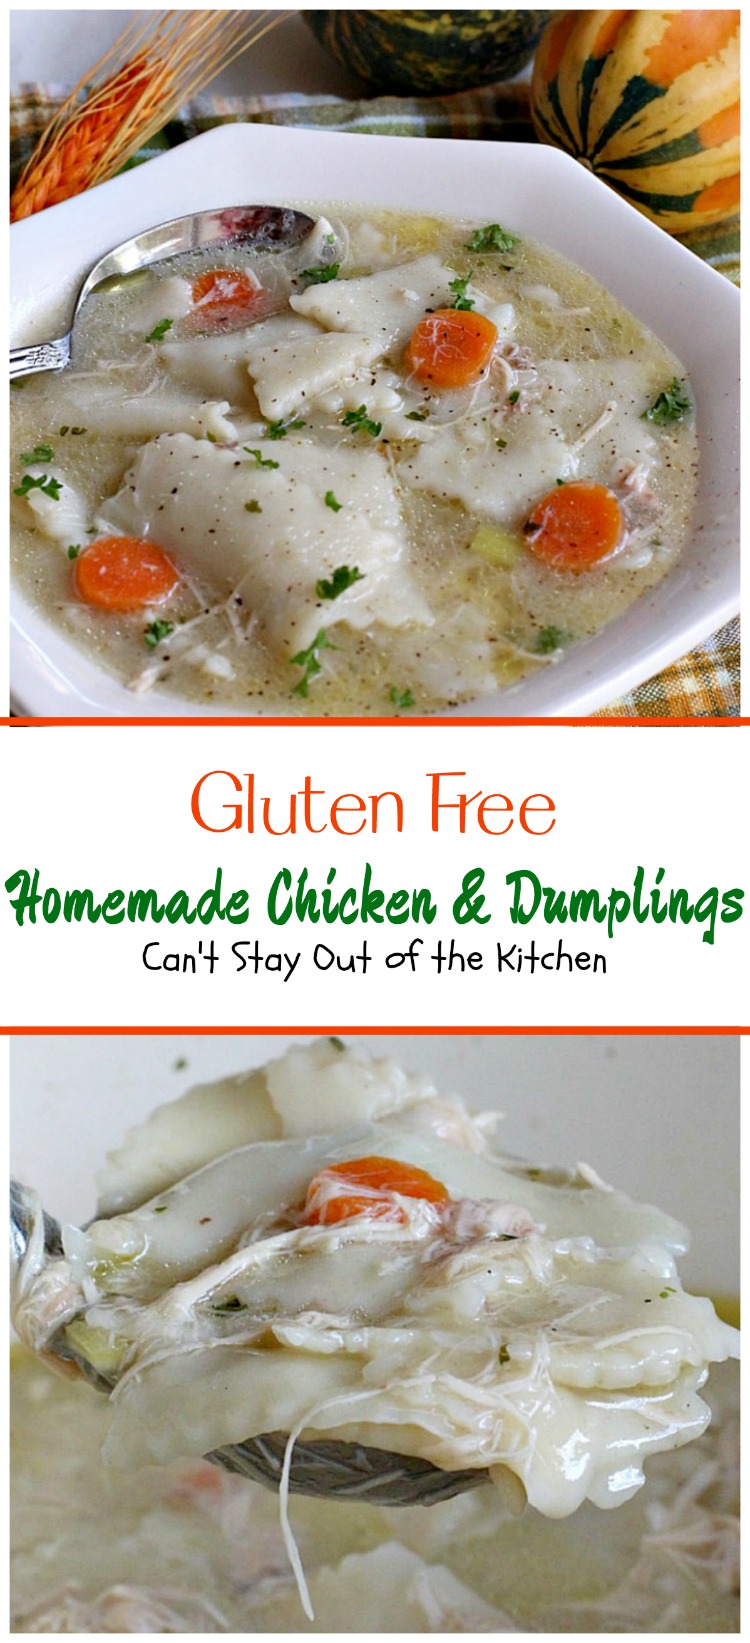 Gluten Free Homemade Chicken & Dumplings | Can't Stay Out of the Kitchen